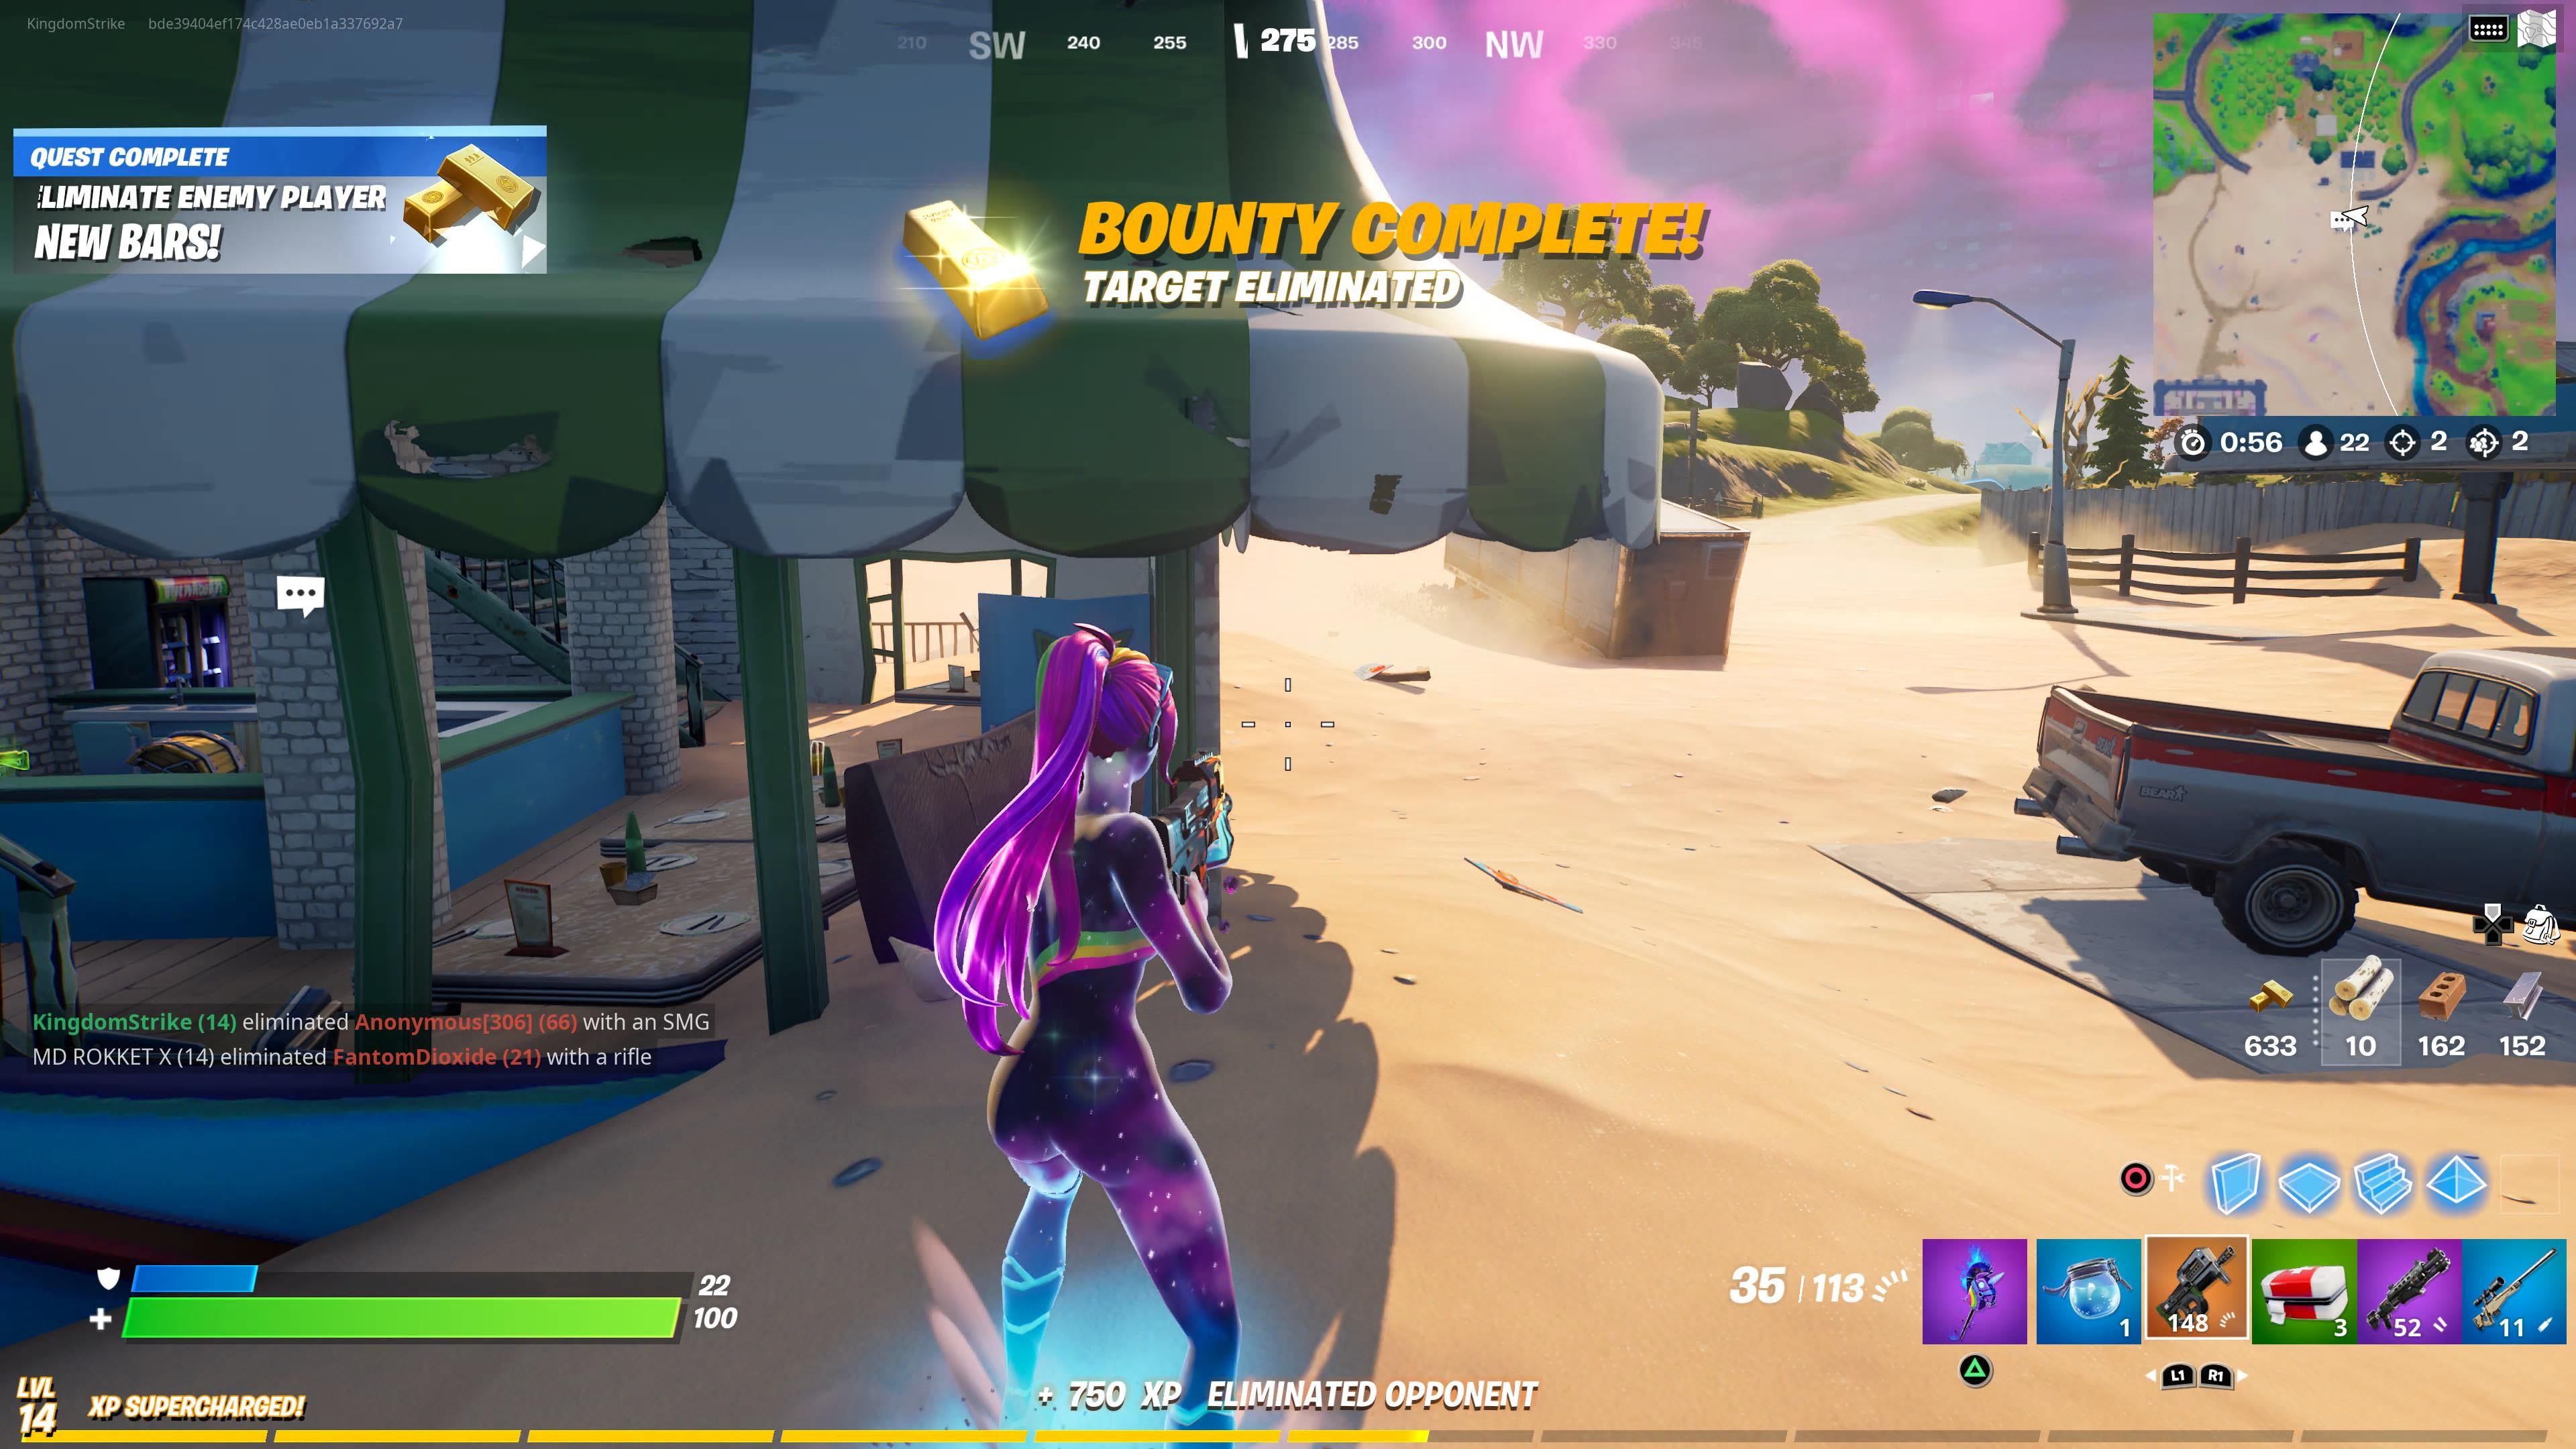 Boop on X: Fortnite has changed objective bounties, more